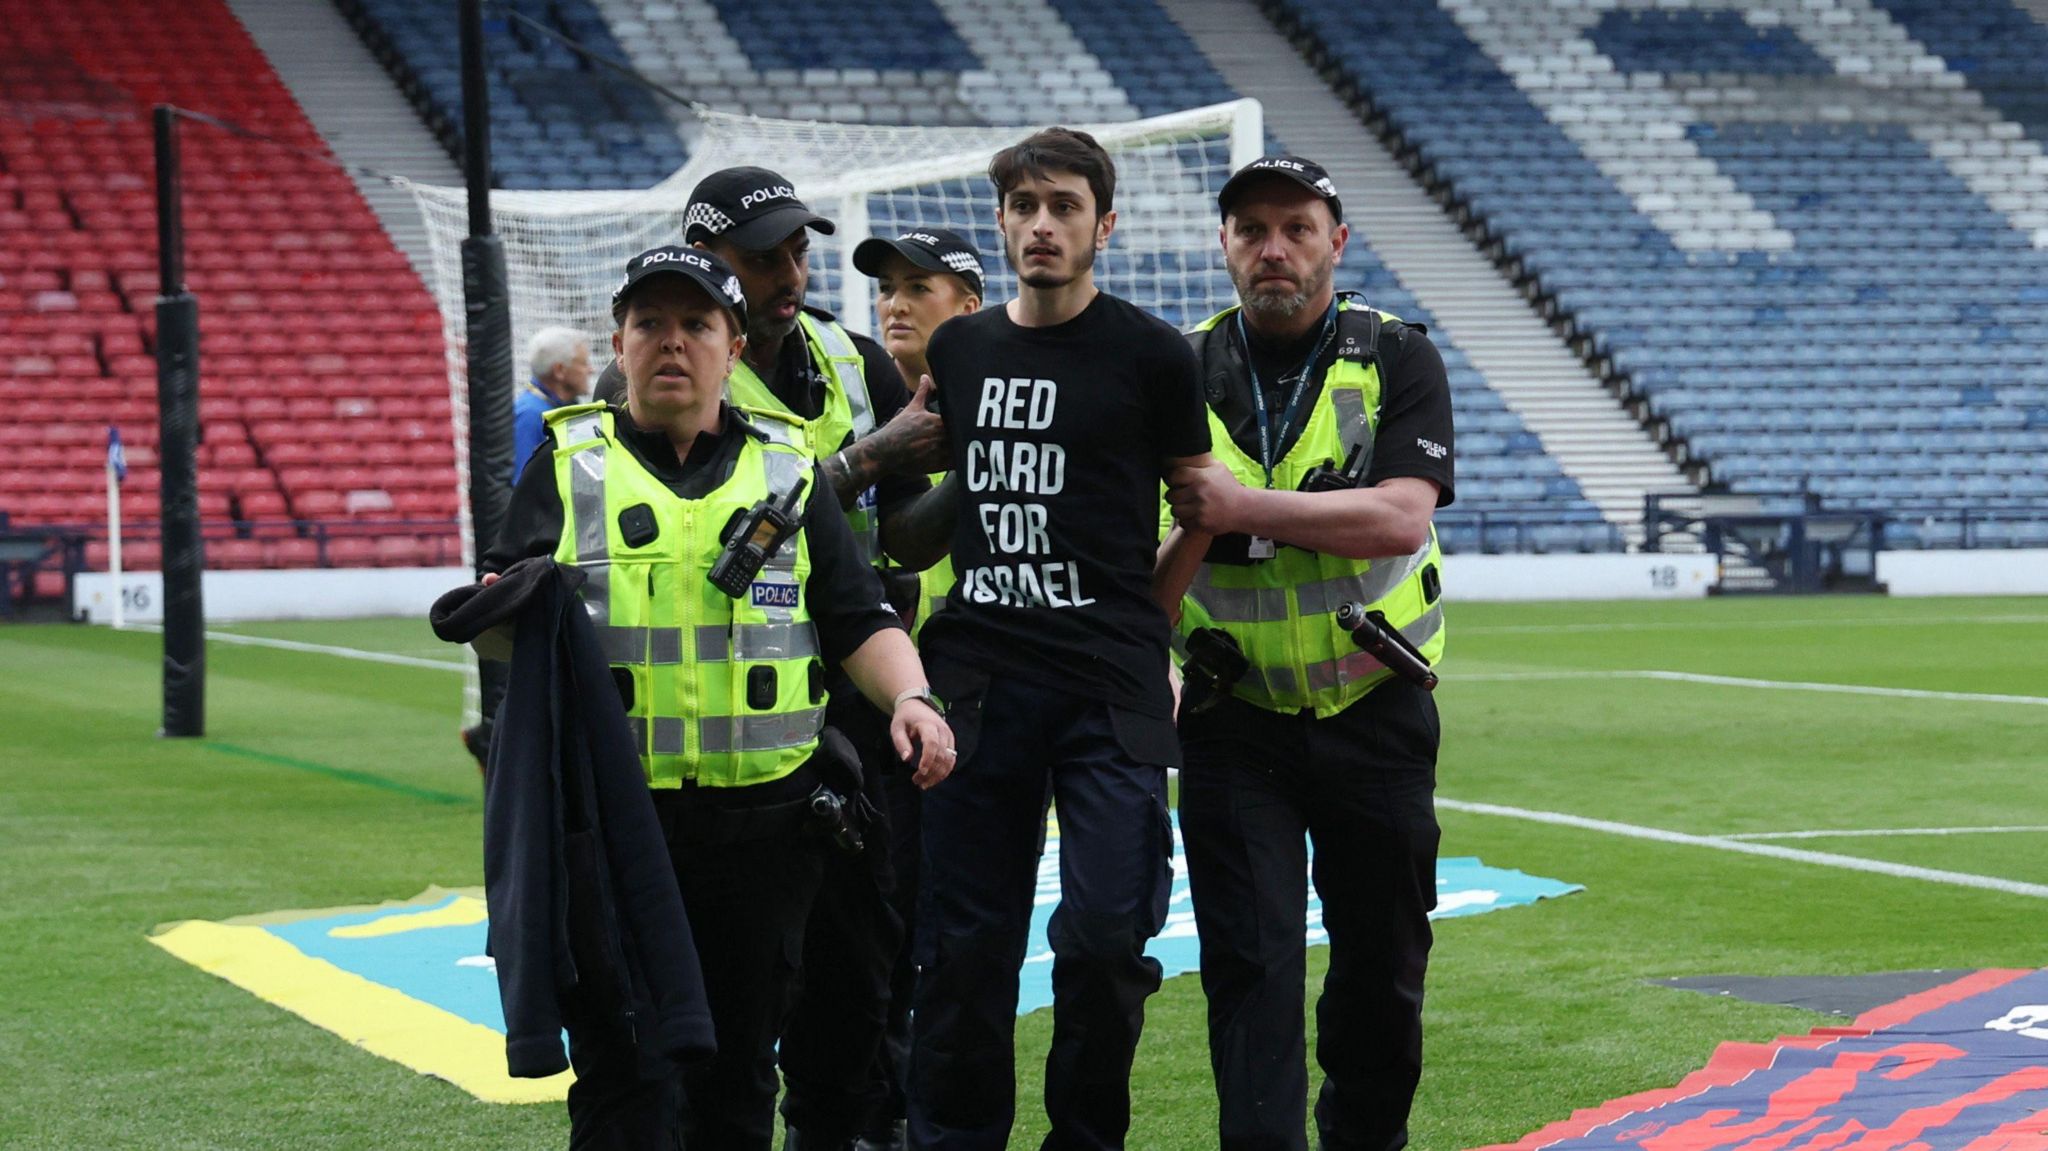 The protester being removed from the pitch by police